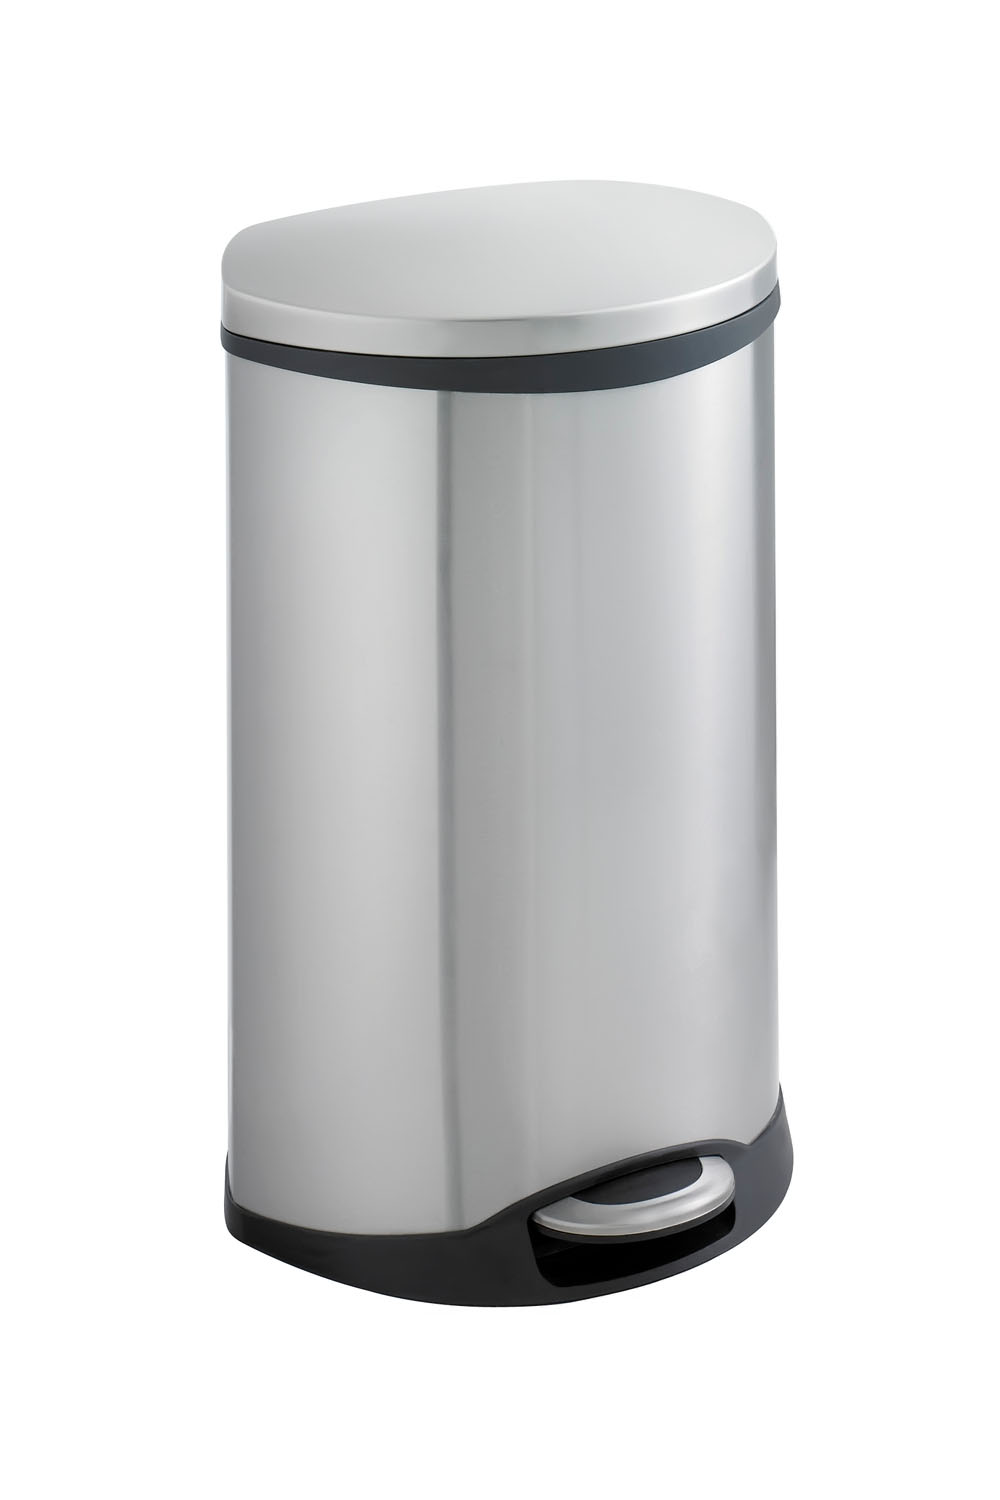 Safco Ellipse Step On Can Waste Receptacle - 12.50 gal Capacity - Elliptical - 17.5" Height x 26.5" Width x 14" Depth - Steel - 